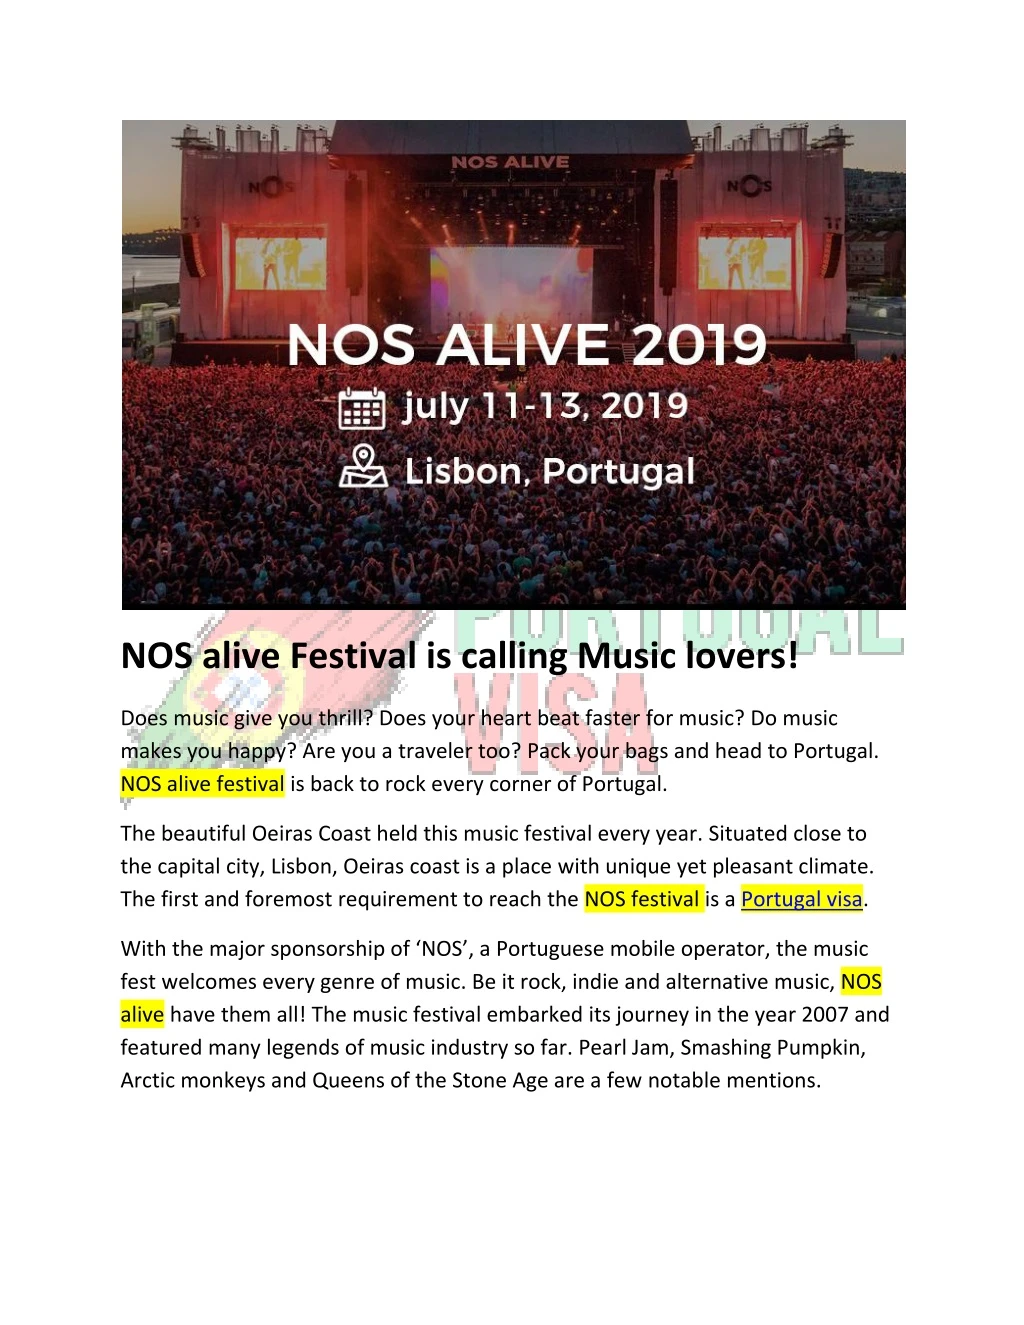 nos alive festival is calling music lovers